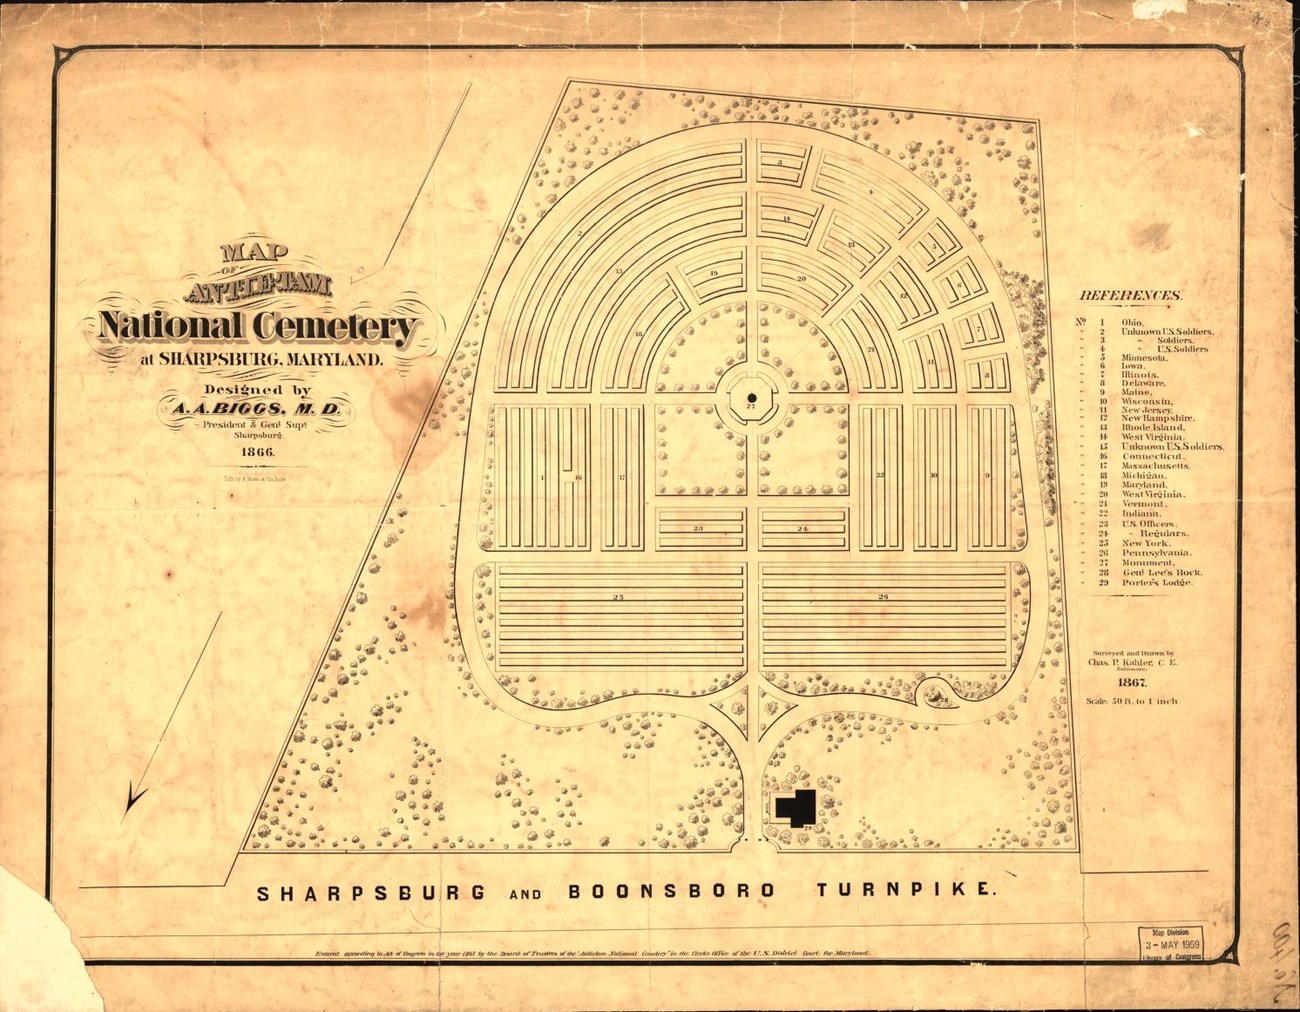 Map of Antietam National Cemetery showing the roads, arrangement of burial areas, structures, and plantings.